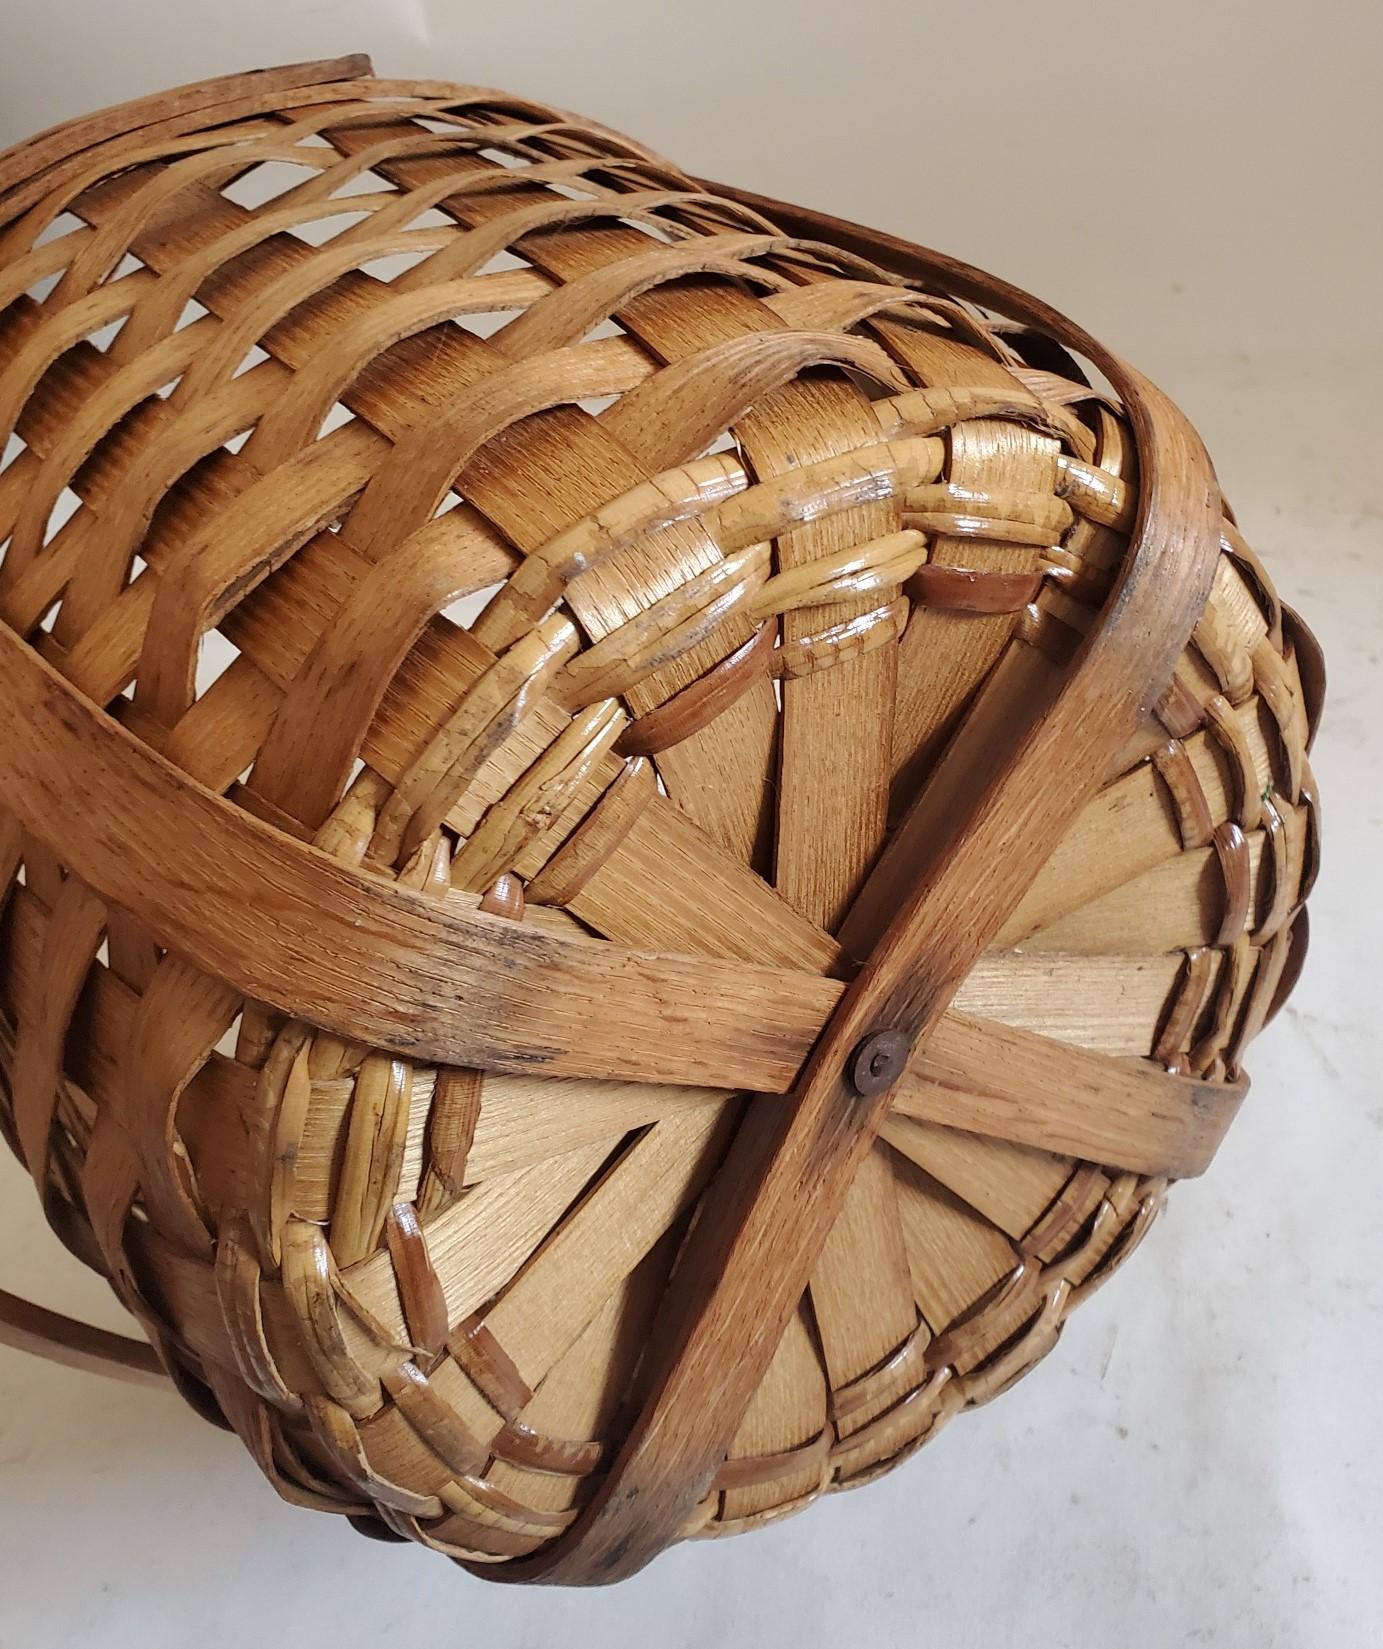 Hand-Crafted 19th Century Apple Basket with Swing Handle